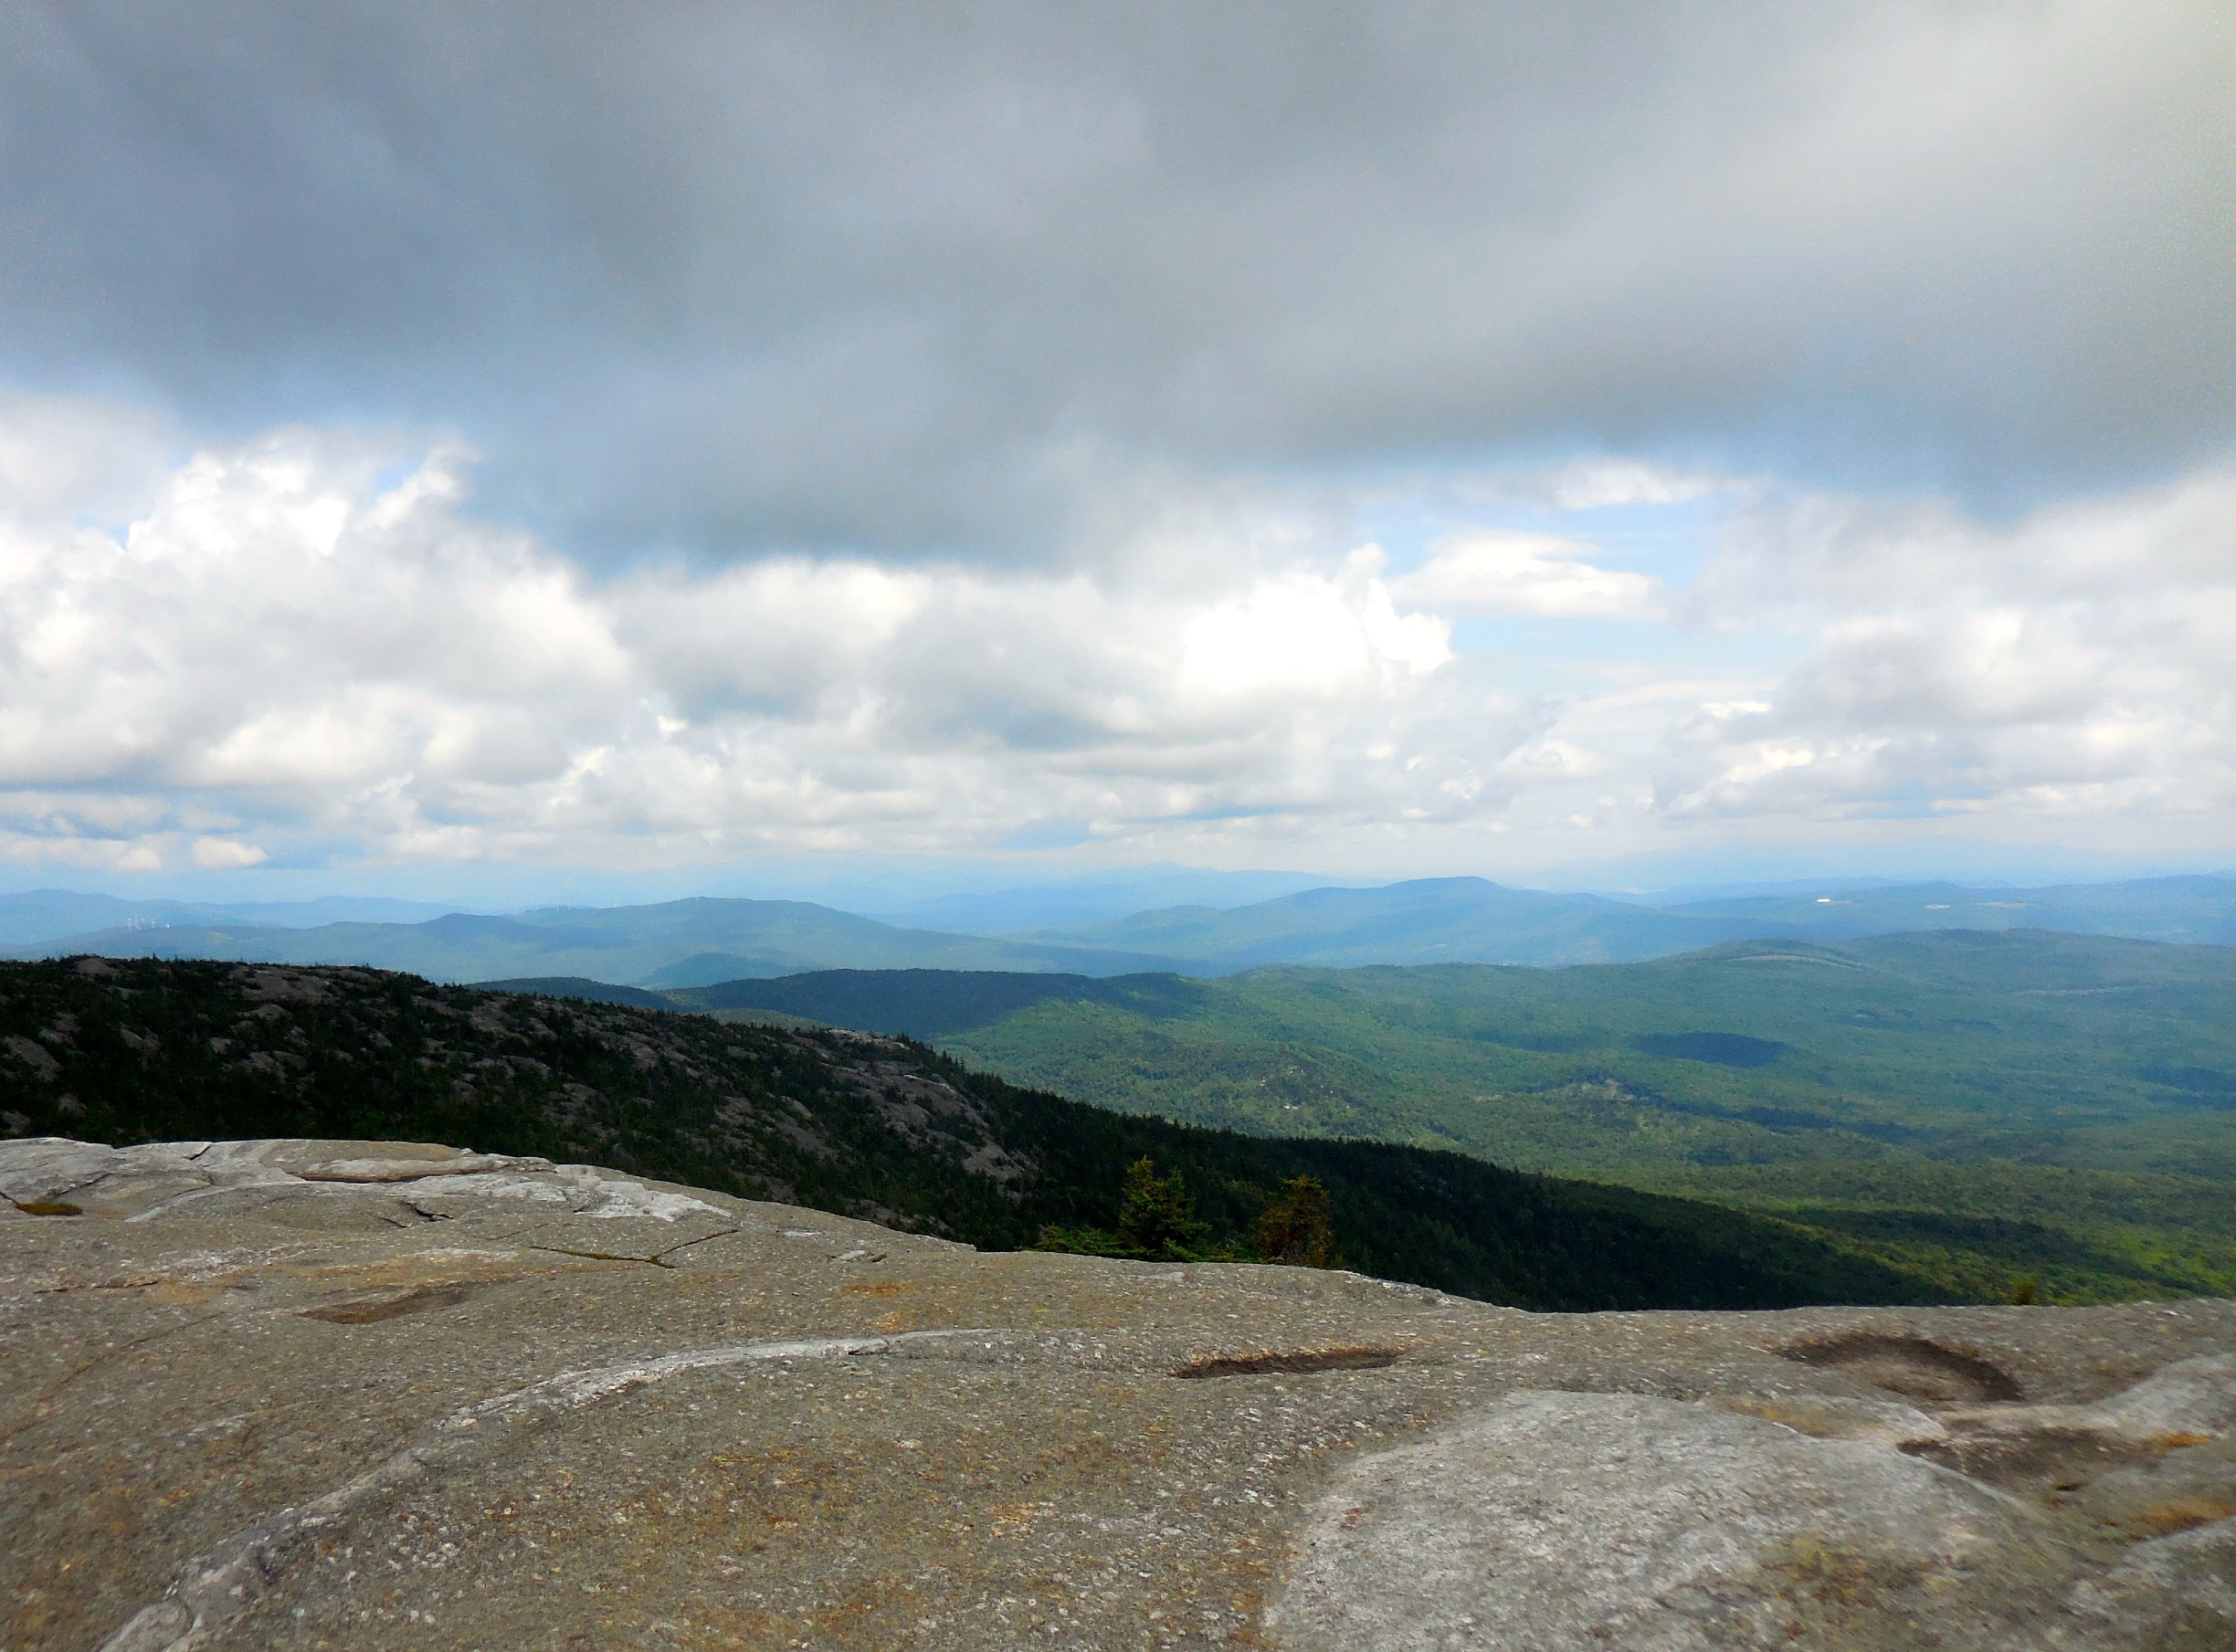 At the summit of Mt. Cardigan. A 3121 ft peak in Central New Hampshire.   A moderate hike of 1.5 miles from the parking lot on the western side of the mountain. Stunning 360 degree views off of the granite, treeless summit make this an outstanding short day hike for families. It can be warm hiking up, and quite cooler with a lot a wind at the top.